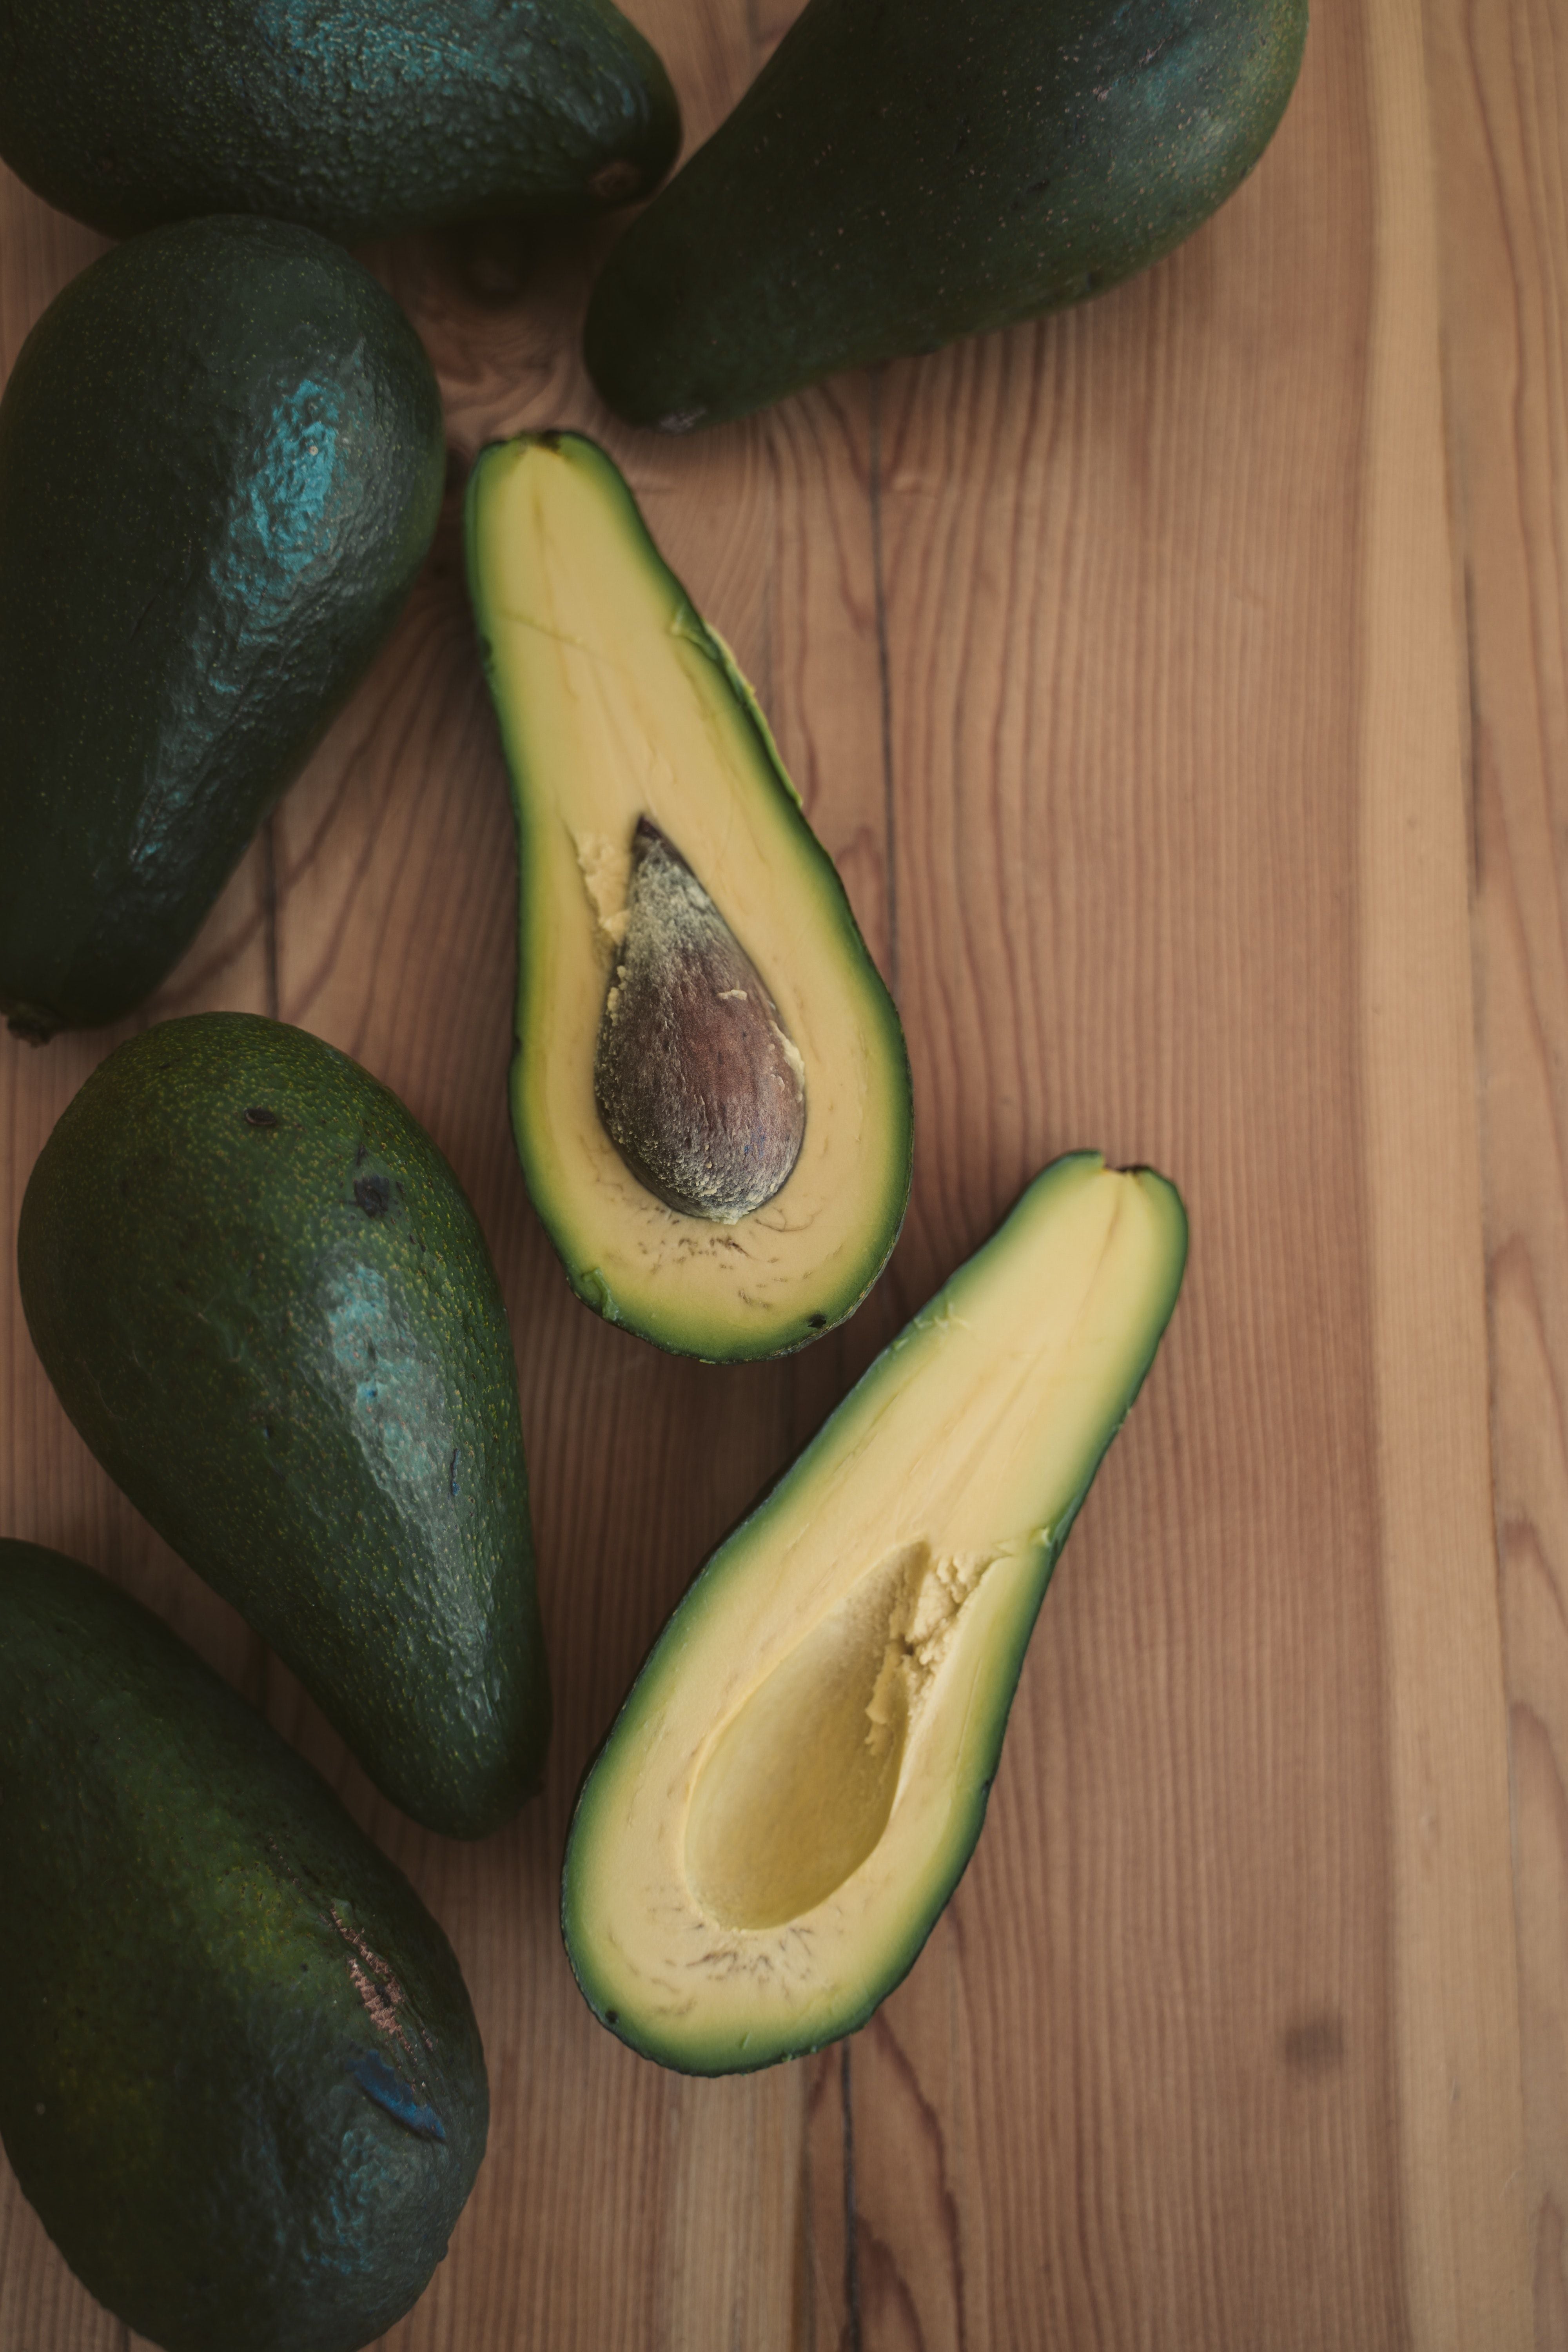 EU rejected a container of Hass avocado from Peru for having a high level of cadmium